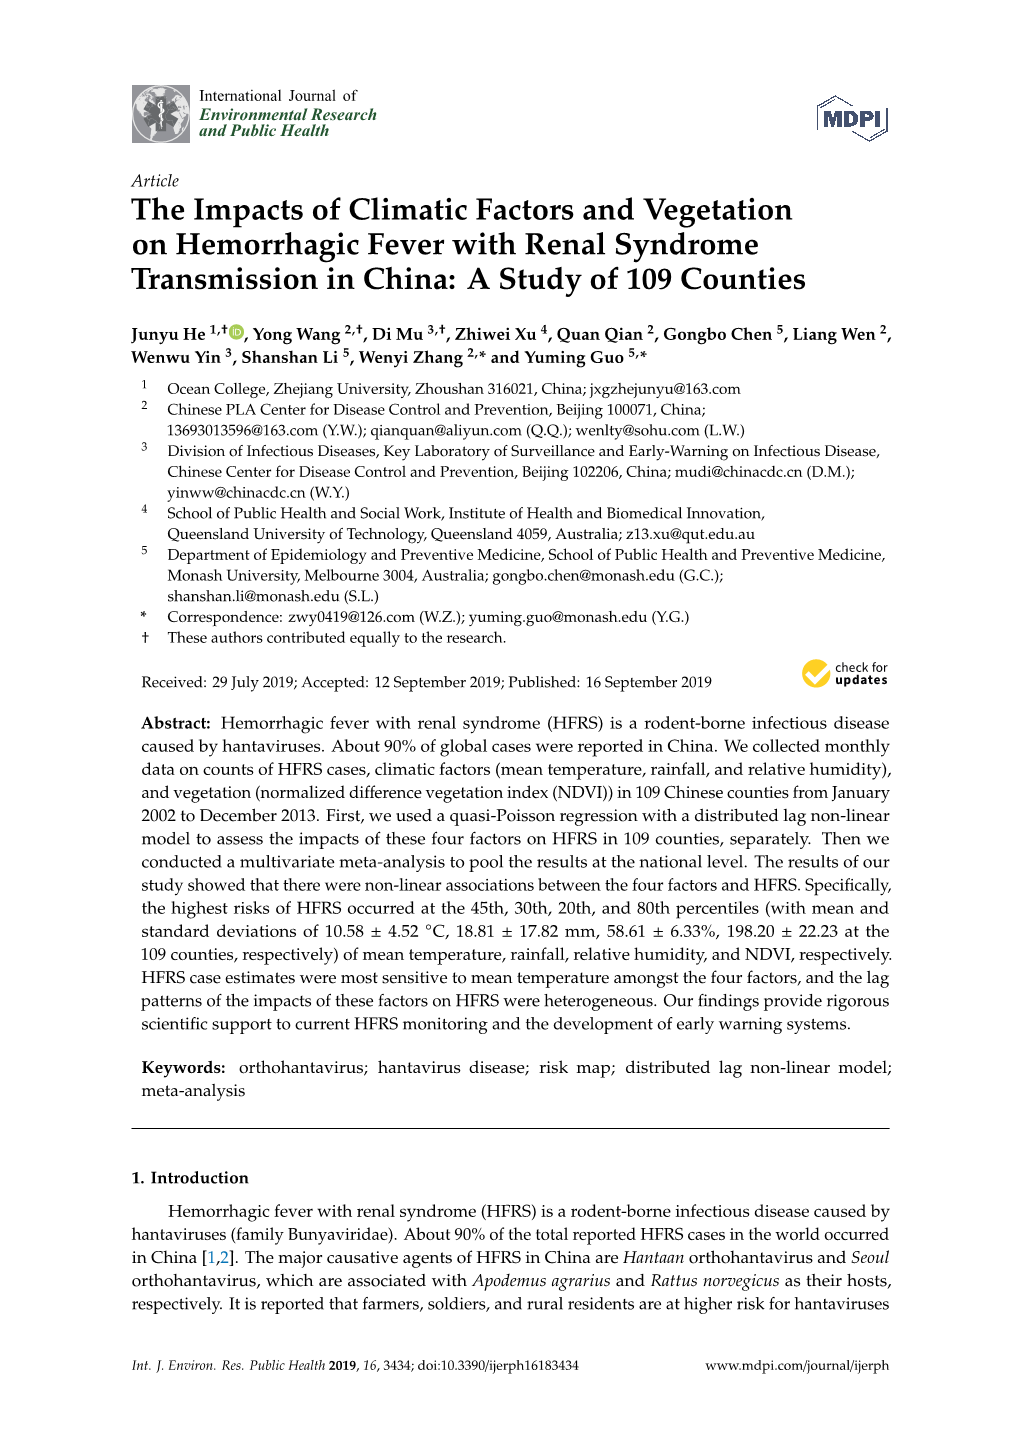 The Impacts of Climatic Factors and Vegetation on Hemorrhagic Fever with Renal Syndrome Transmission in China: a Study of 109 Counties